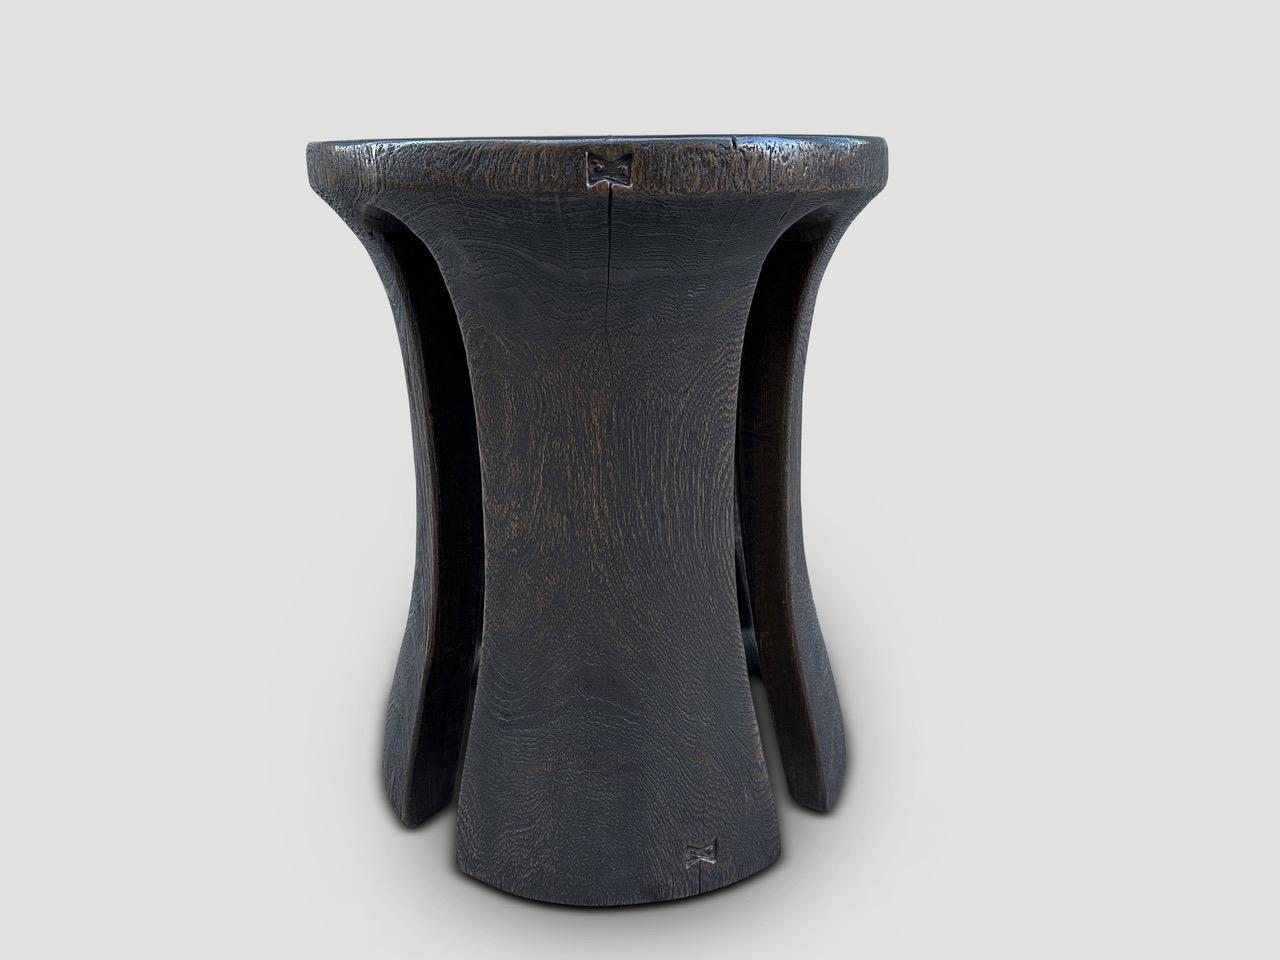 A century old teak wood mortar originally used to grind rice, is repurposed into this minimalist side table or stool. We first turned it upside down and smoothed out the entire piece and then made sleek cut outs and added recessed butterflies inlaid